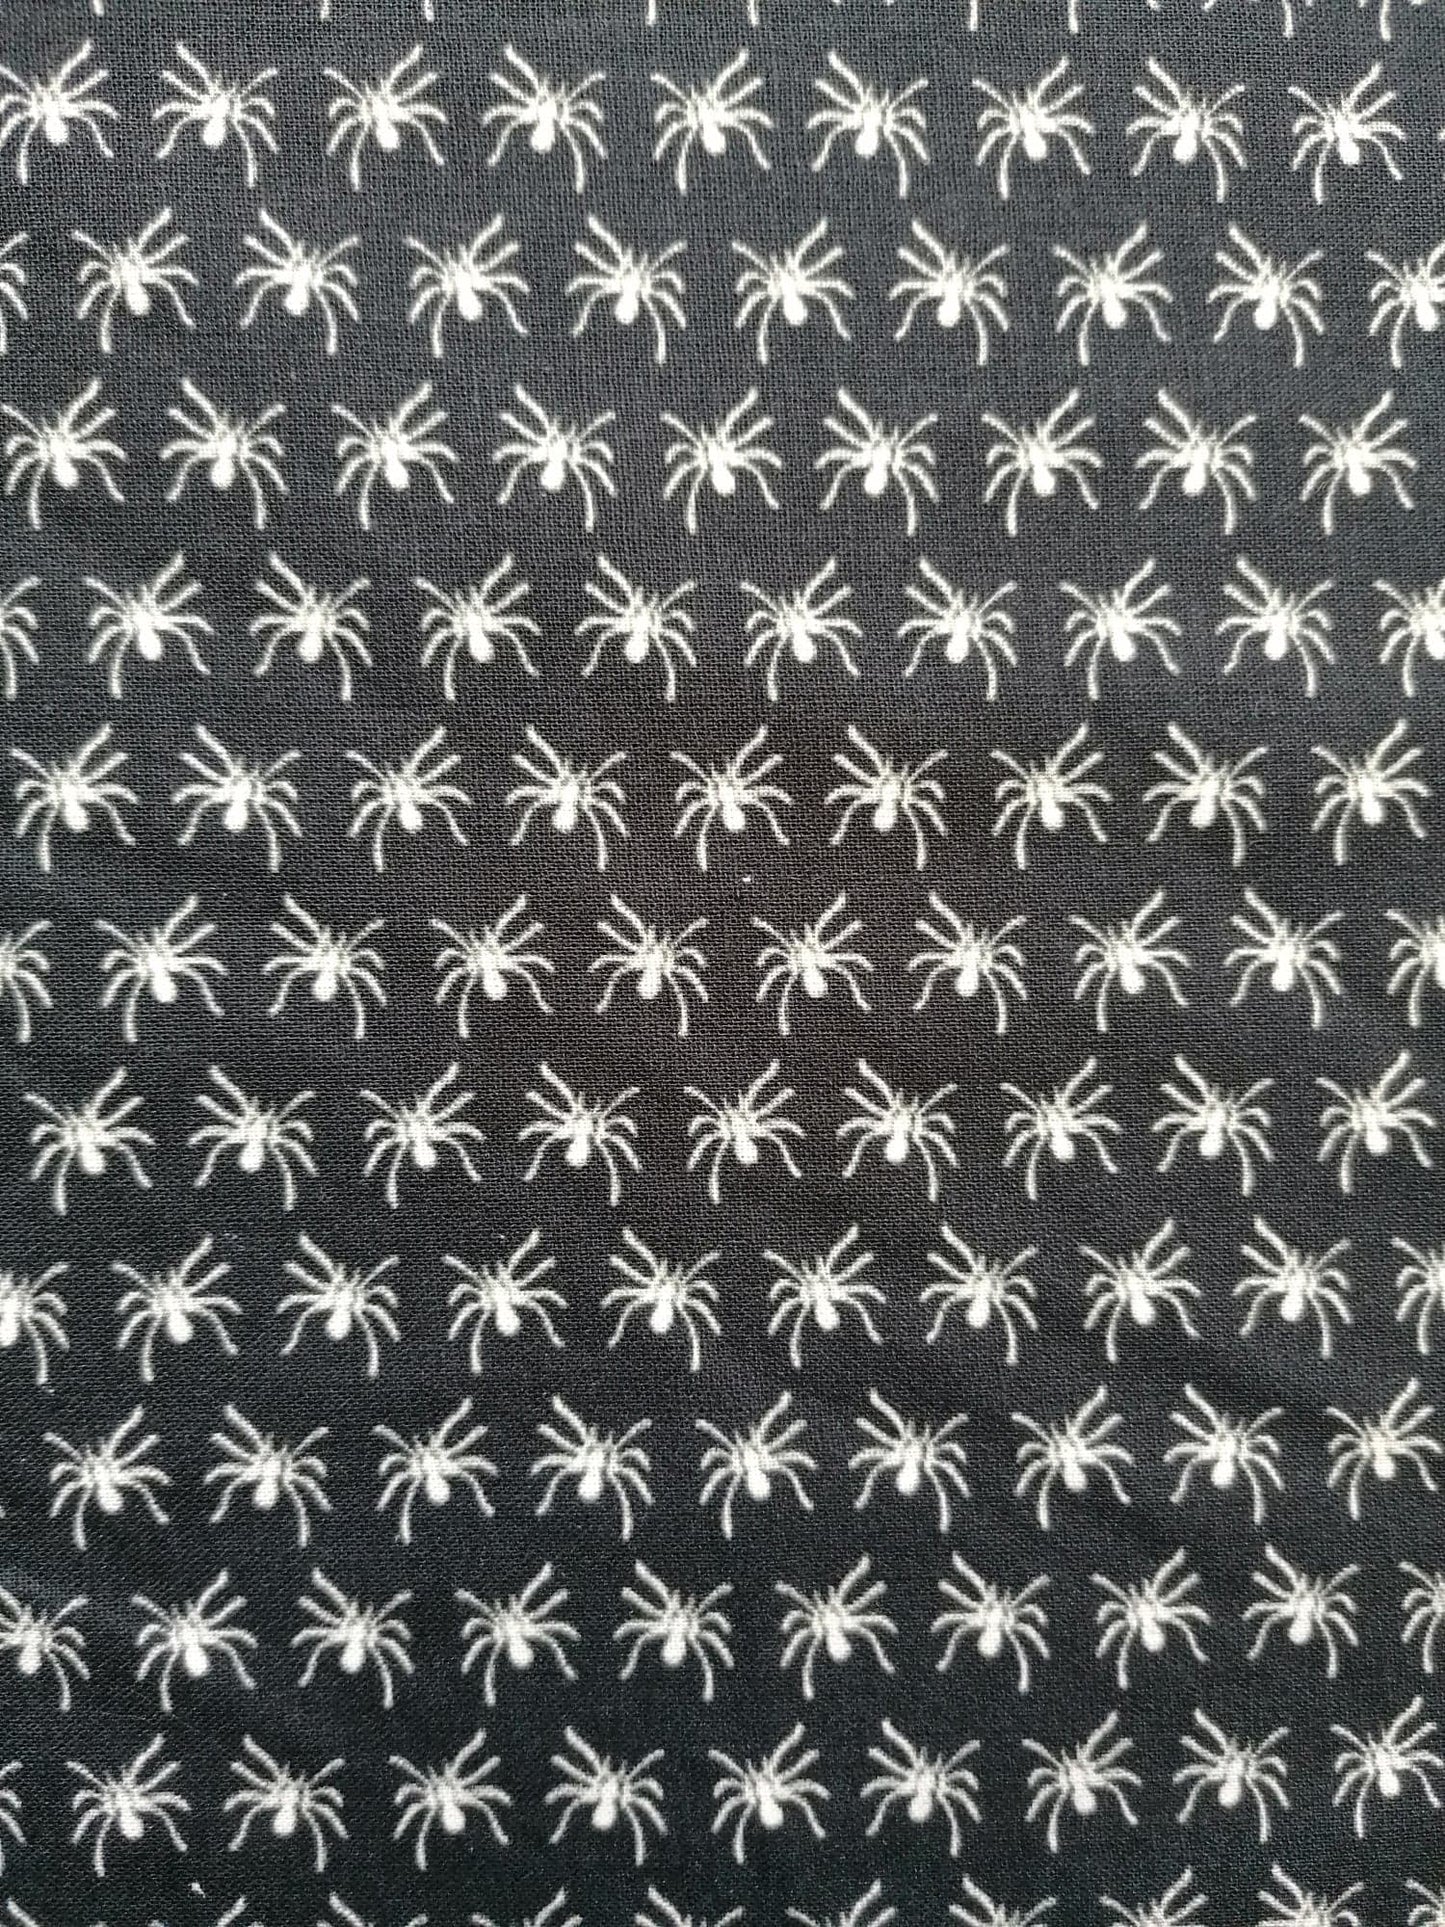 100% Cotton - Quilting and Crafting - Halloween - Black/White - 44" Wide - Sold By the Metre